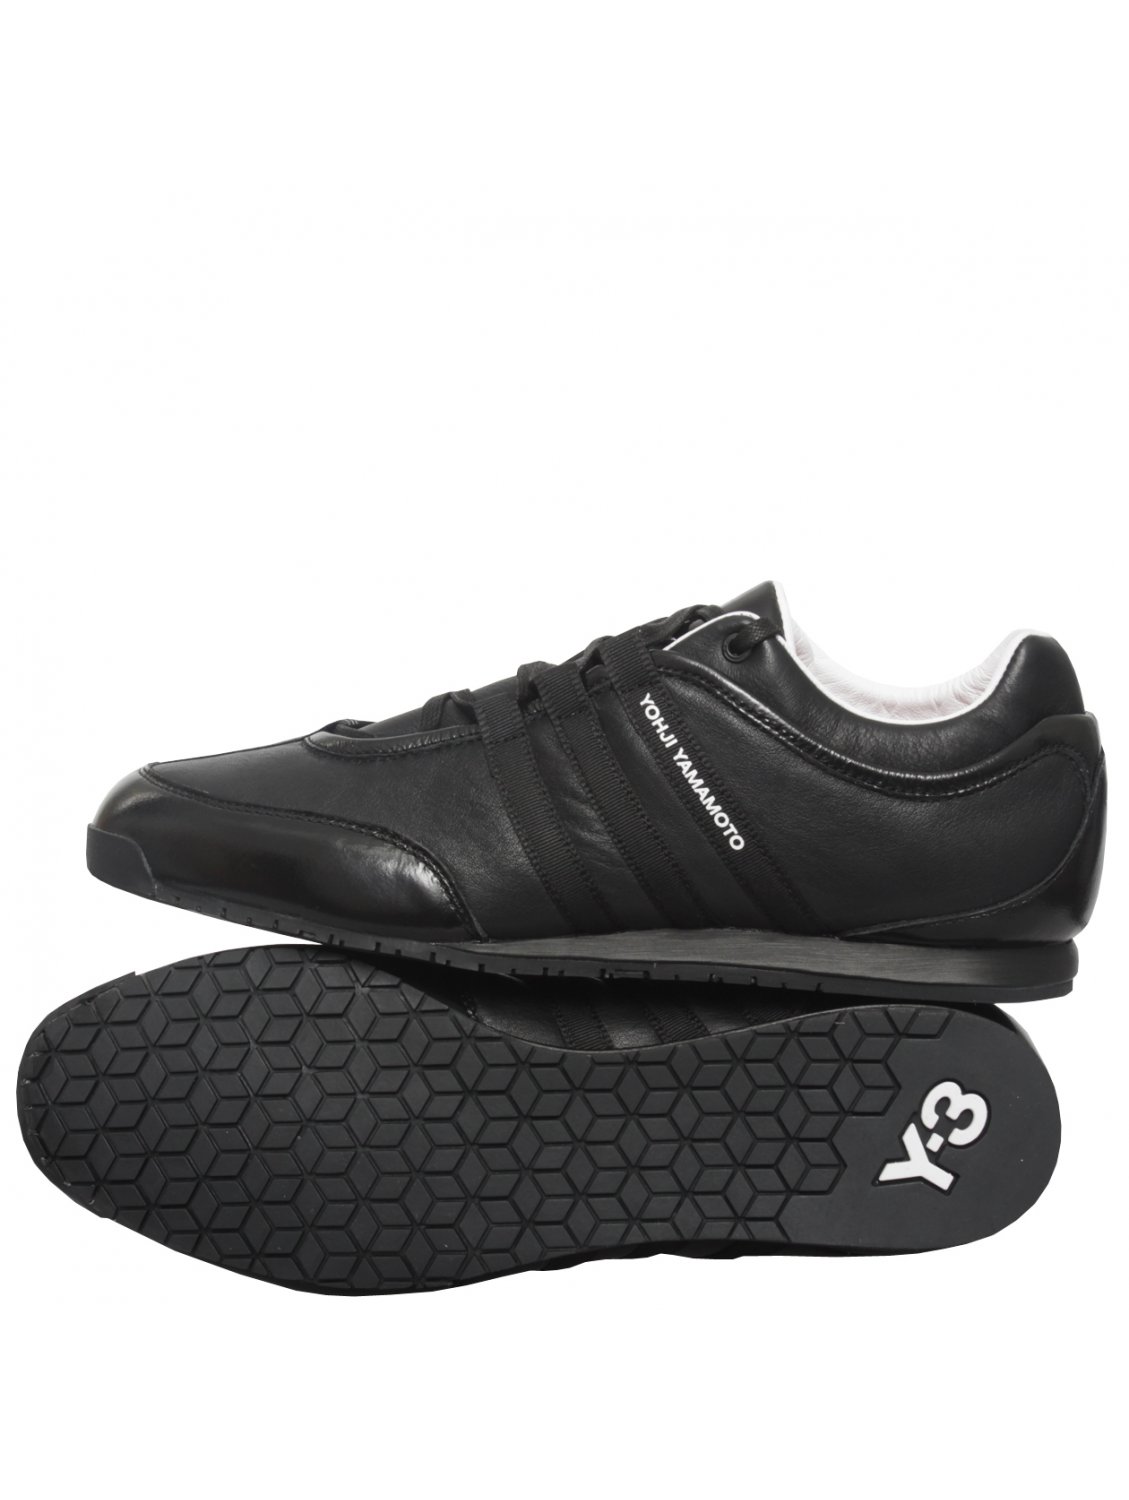 y3 boxing low top trainers